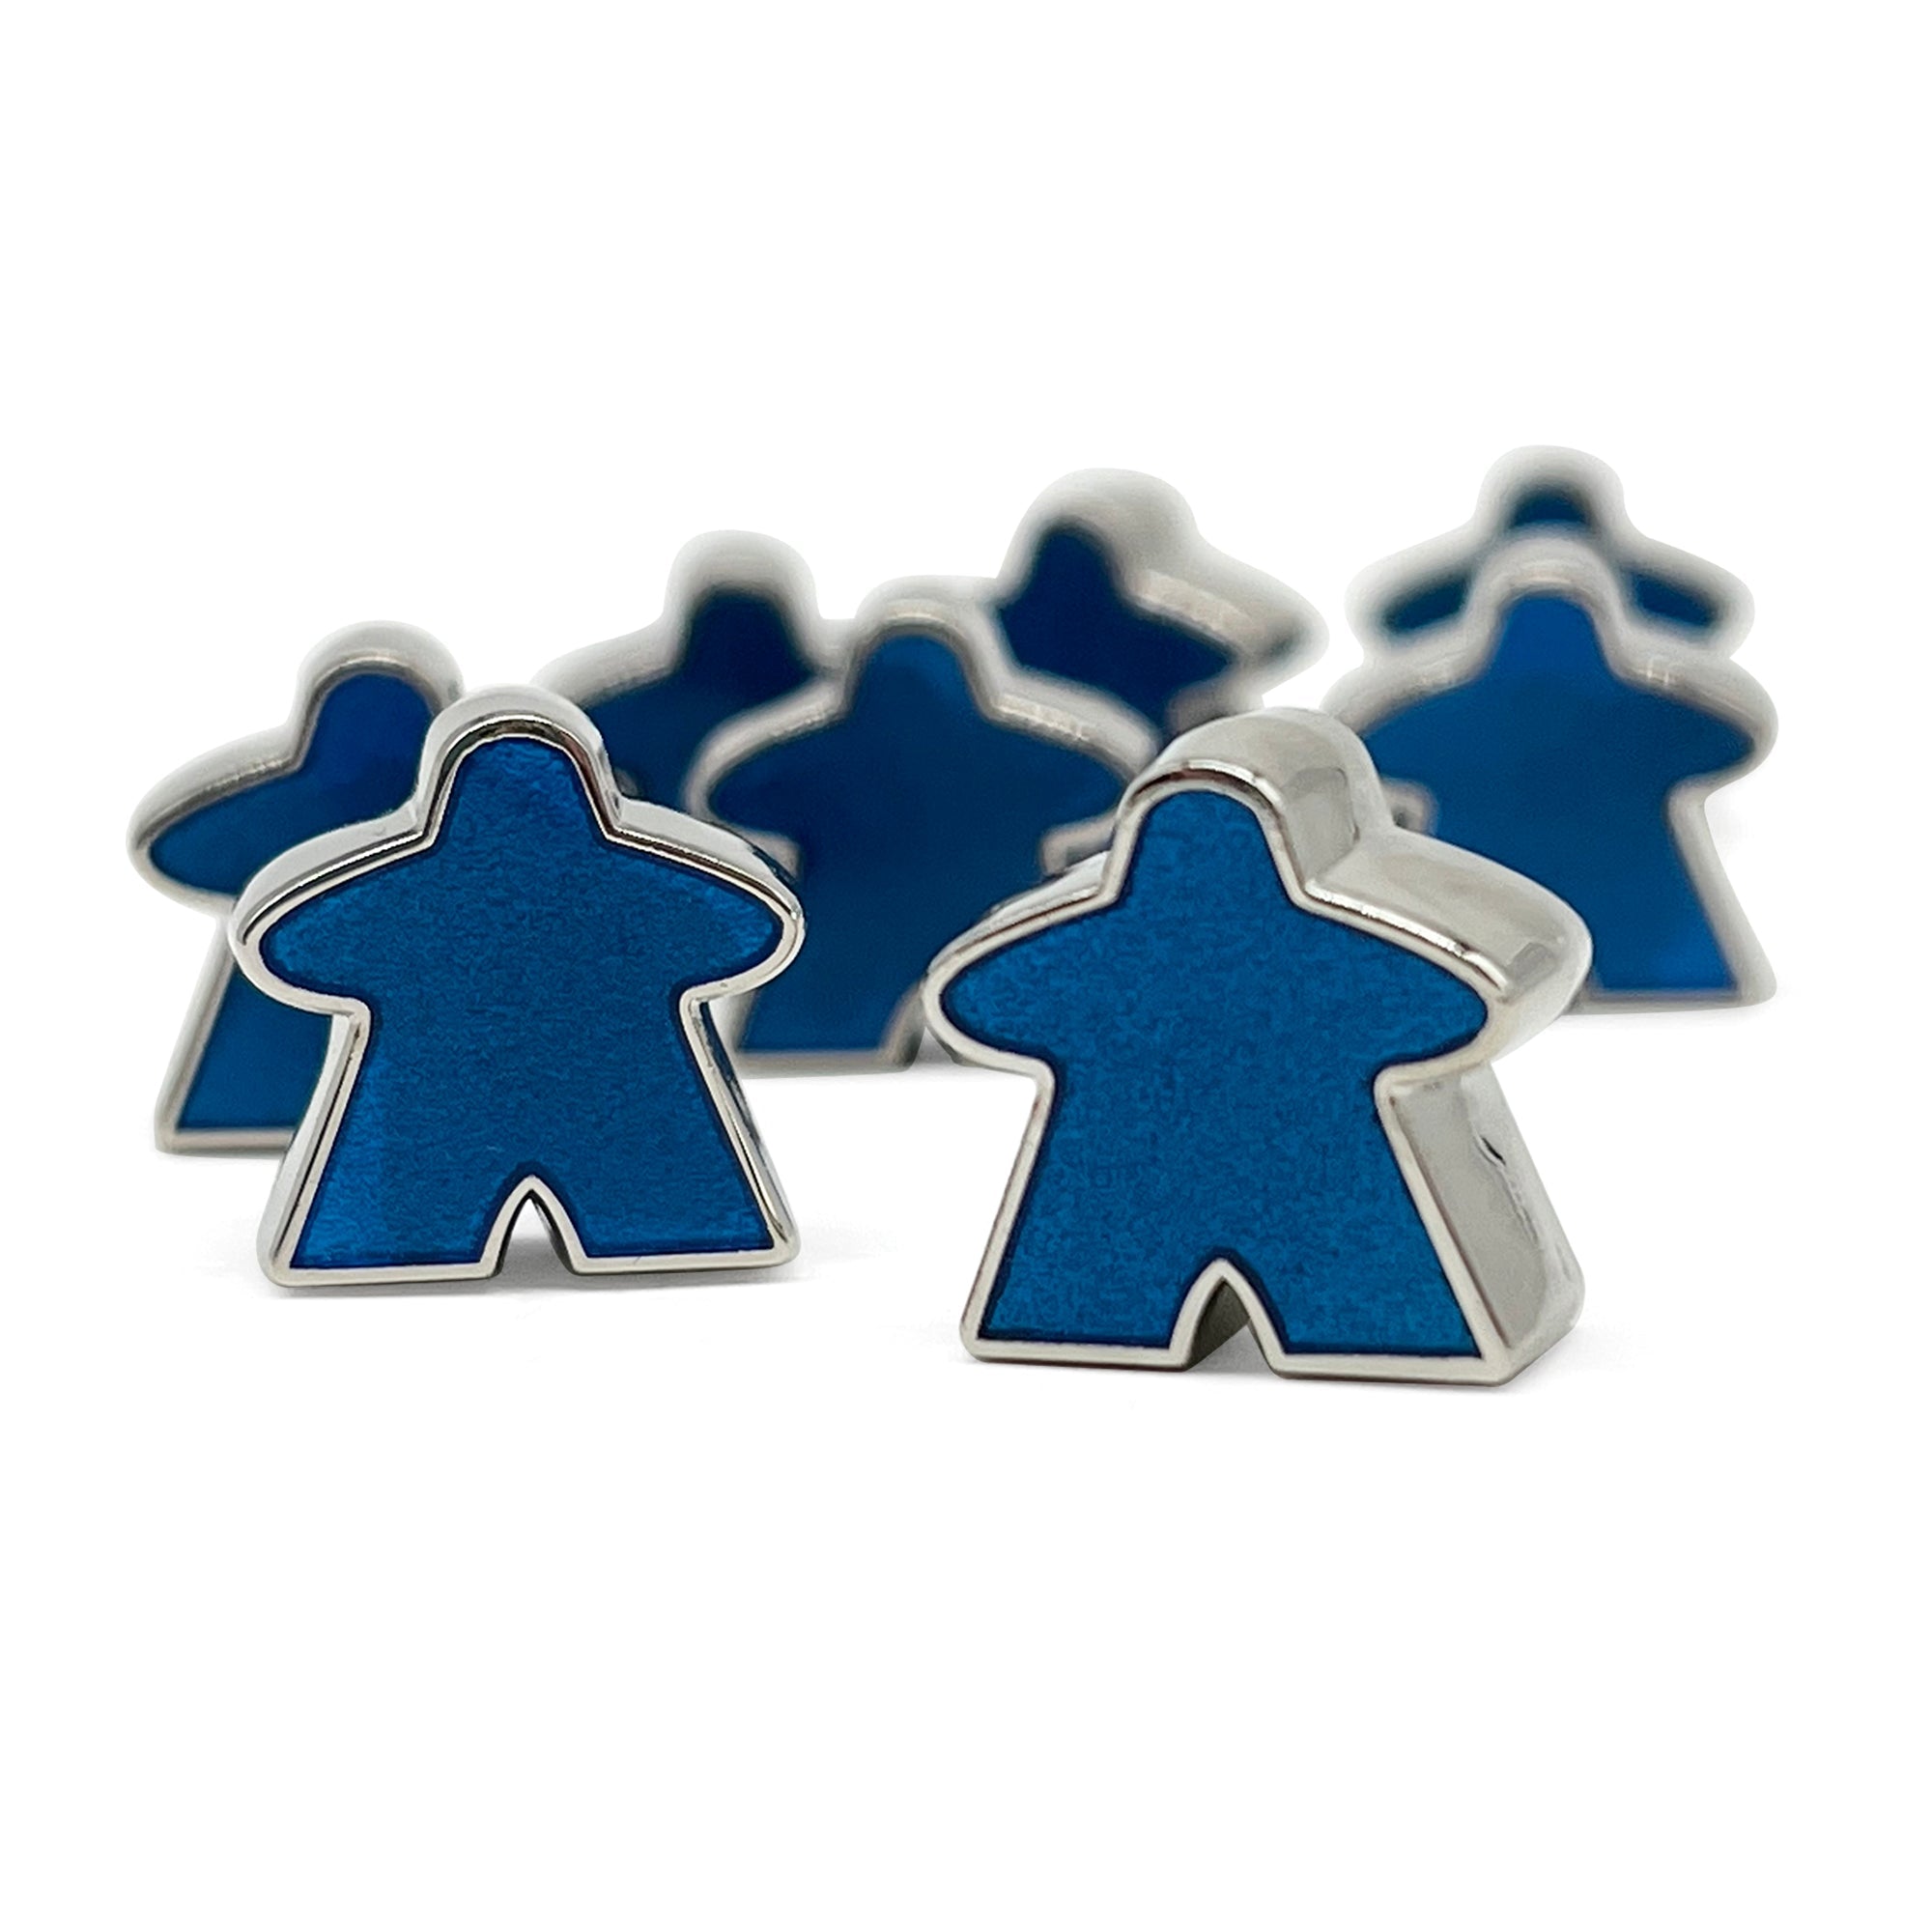 8 Pack of Blue Enamel Meeples by Norse Foundry - NOR 03474